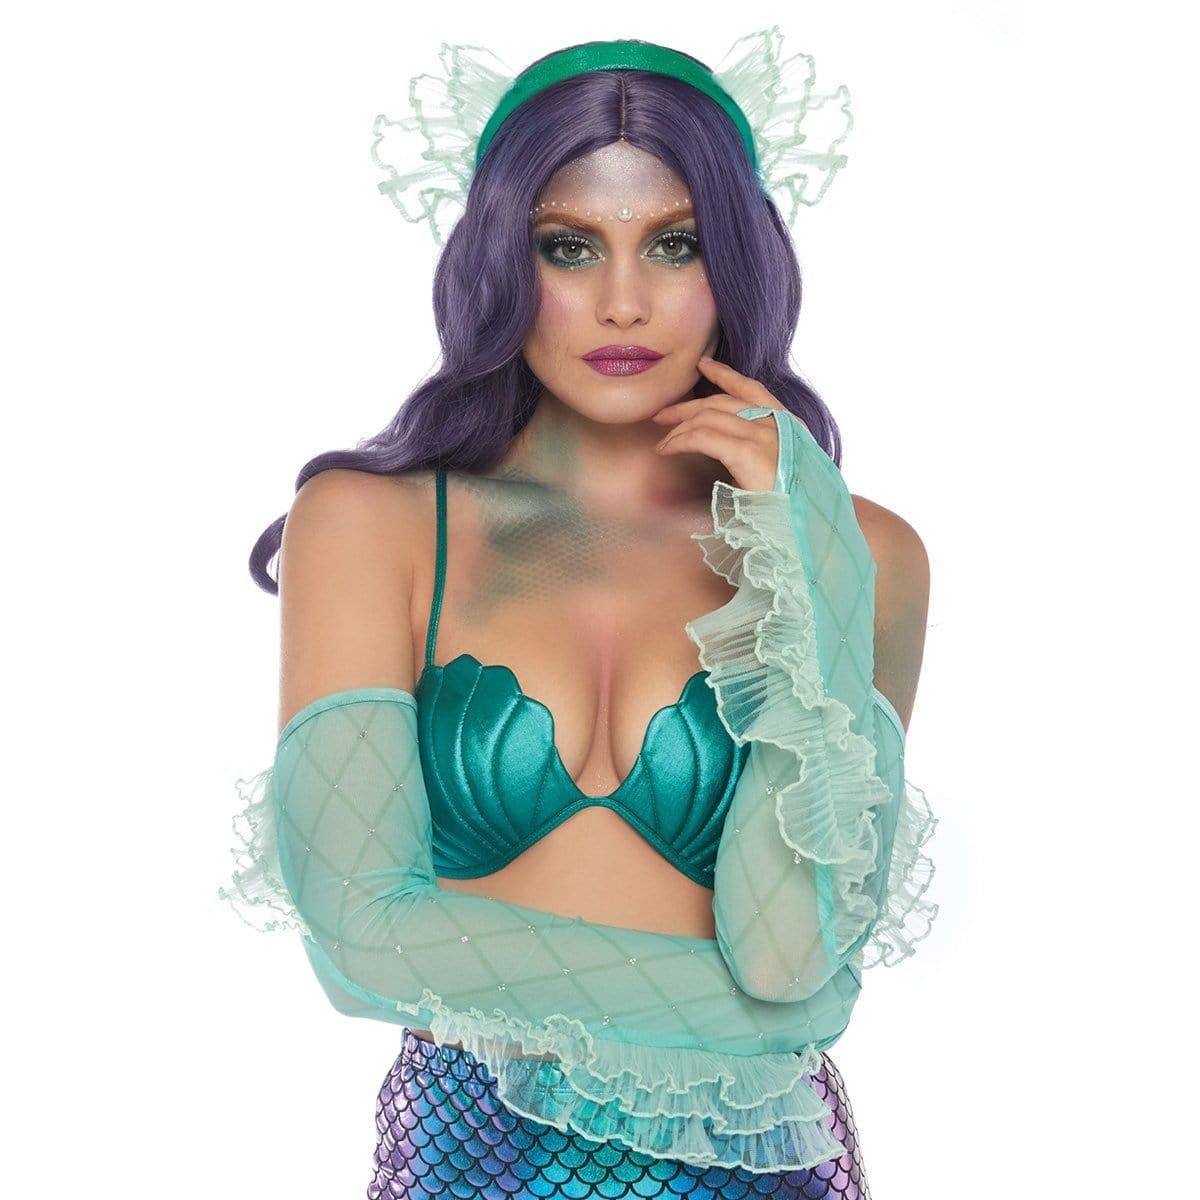 Buy Costume Accessories Sea foam mermaid accessory kit for women sold at Party Expert